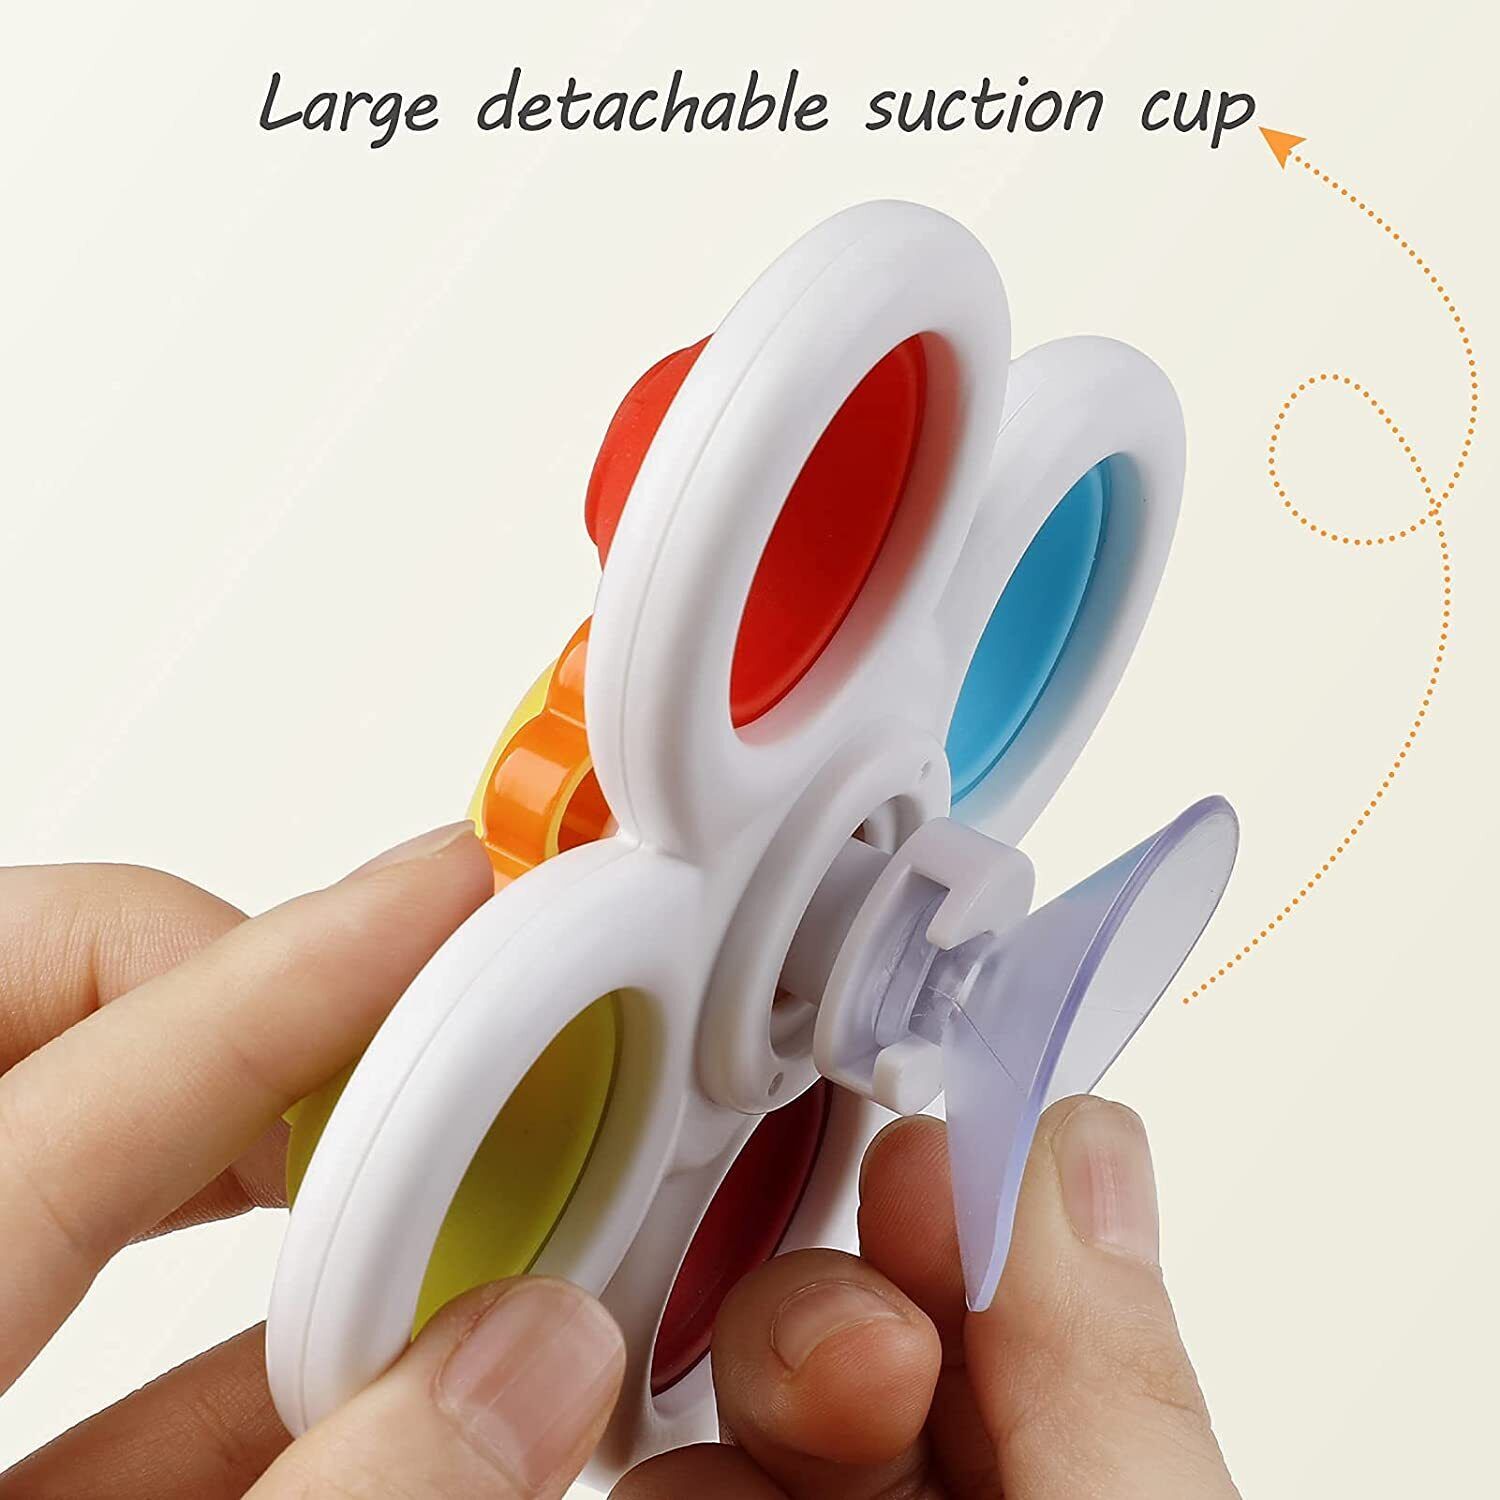 Suction Cup Spinner Toys 3PCS Kids Spinning Top Toys Baby Dimple Sensory Toy Mini Tudou does not apply - фотография #11